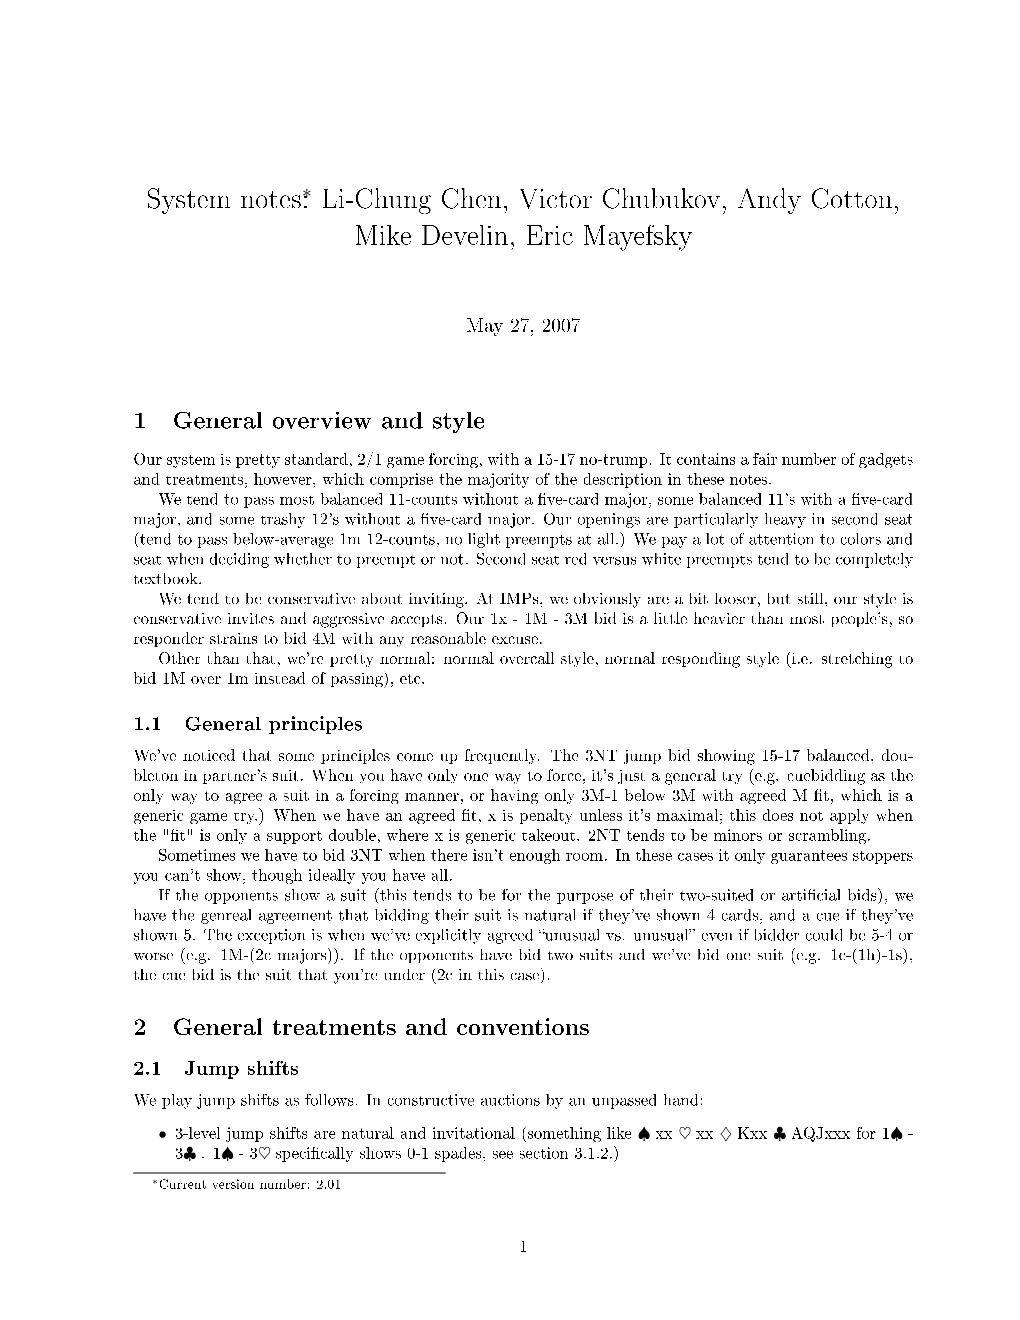 System Notes∗: Li-Chung Chen, Victor Chubukov, Andy Cotton, Mike